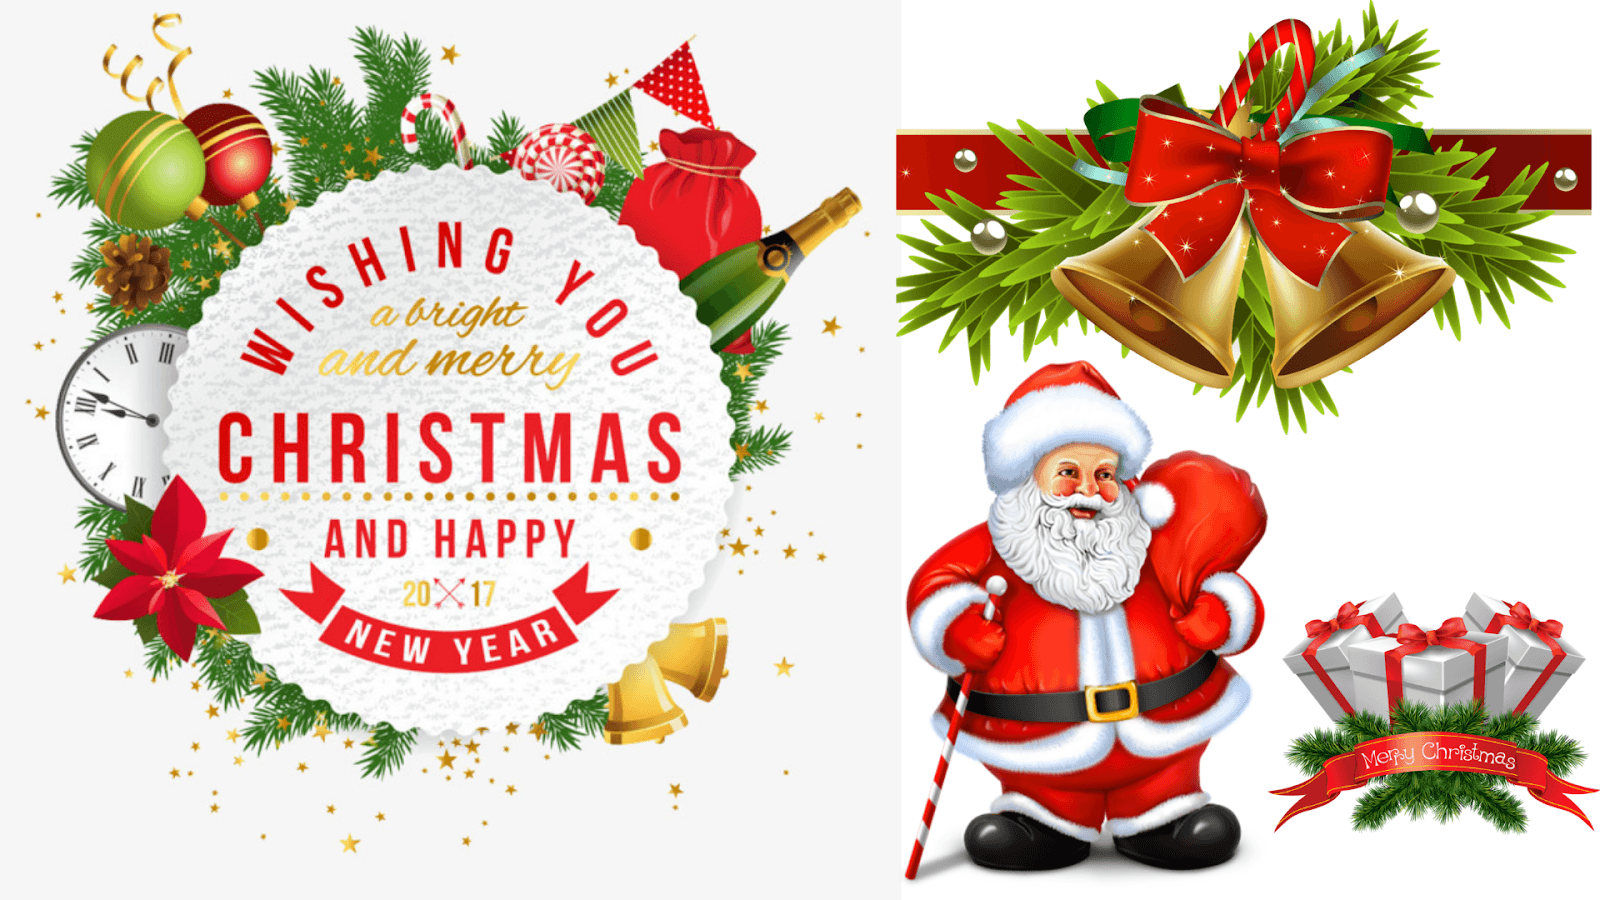 Merry Christmas Day Advance Wishes Image, Picture, Greeting